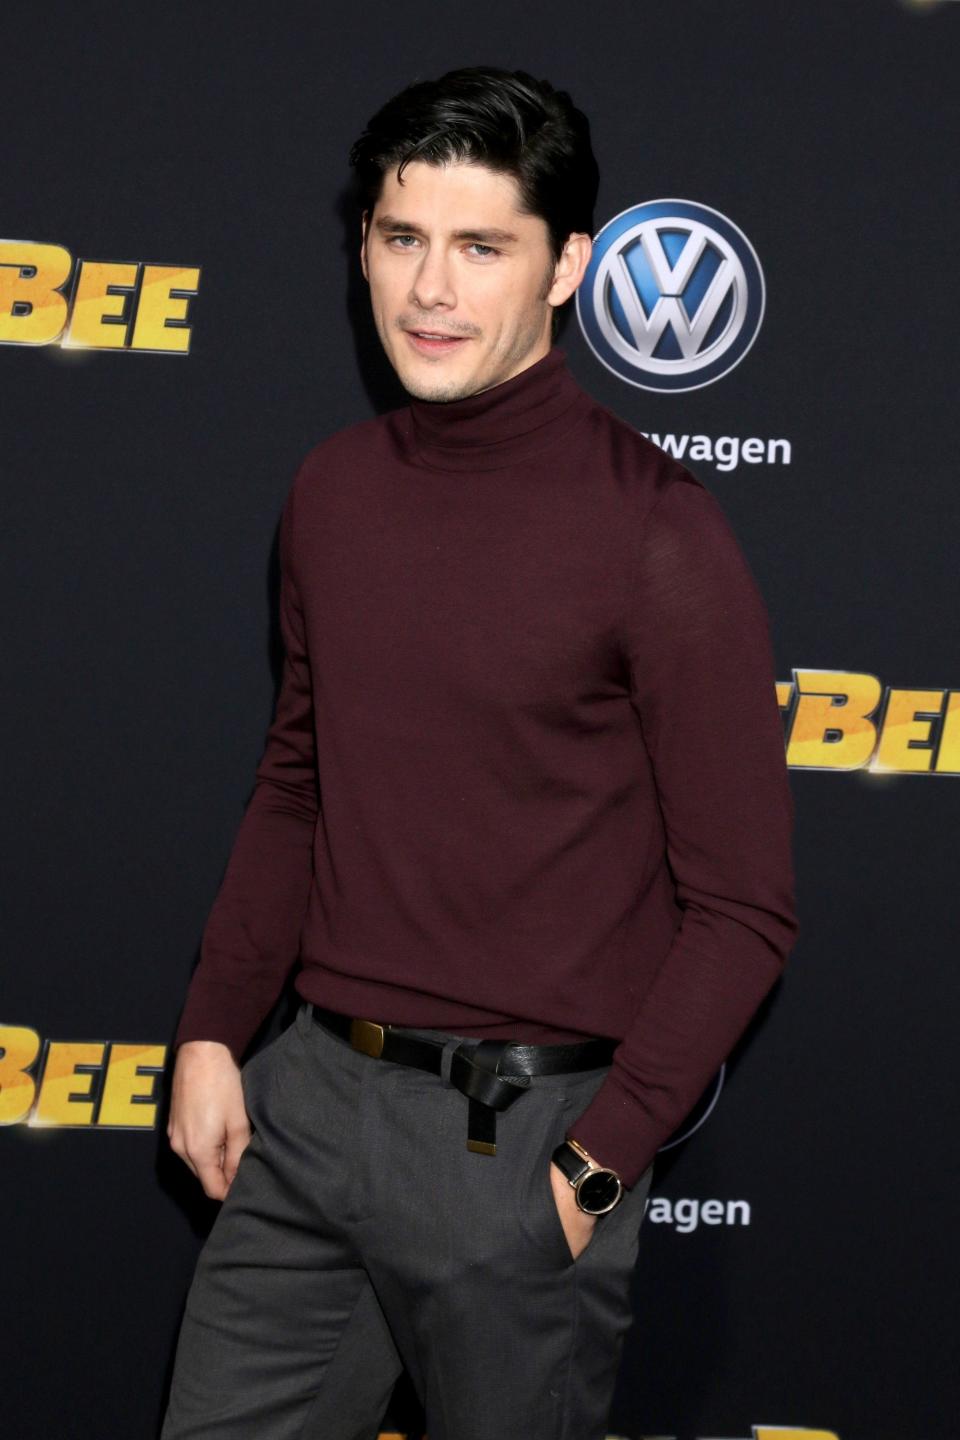 Ricardo at the "Bumblebee" premiere